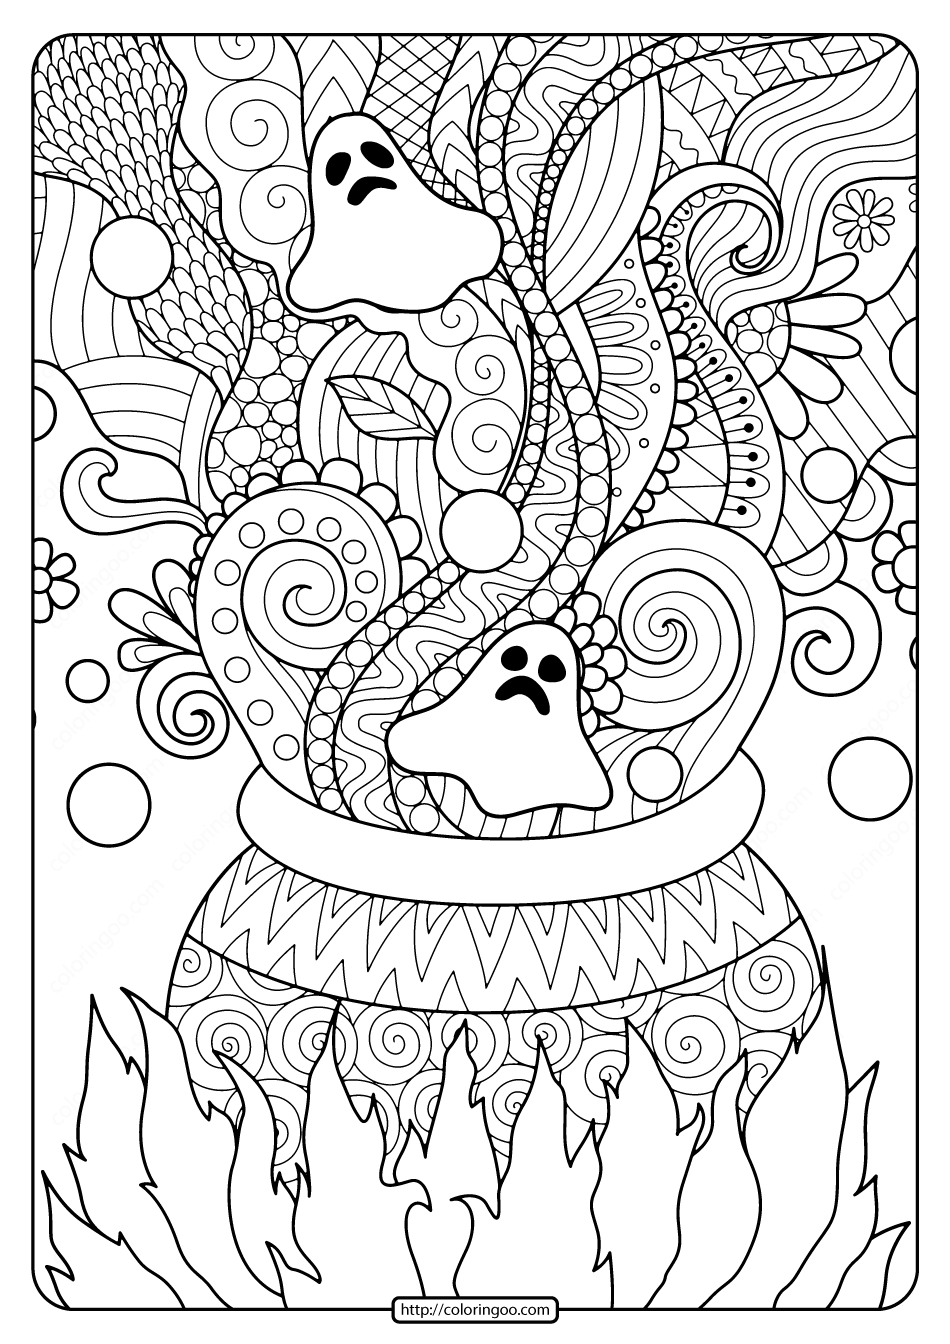 printable ghosts and cauldron coloring pages